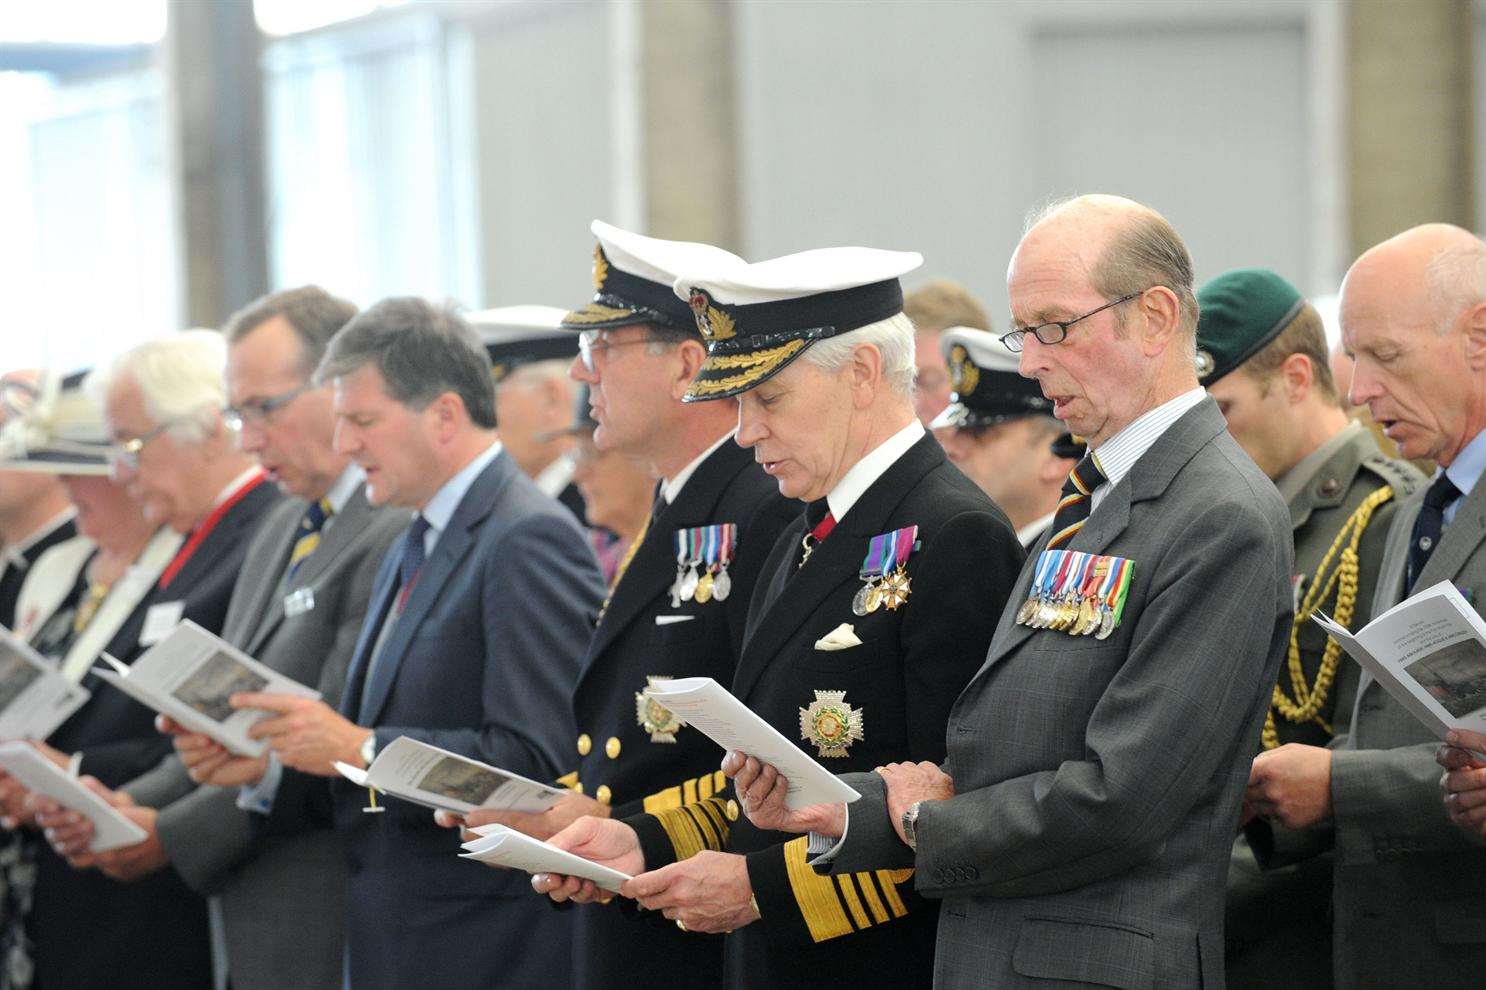 The Duke of Kent joined a memorial service to commemorate the deaths of the 1,459 sailors